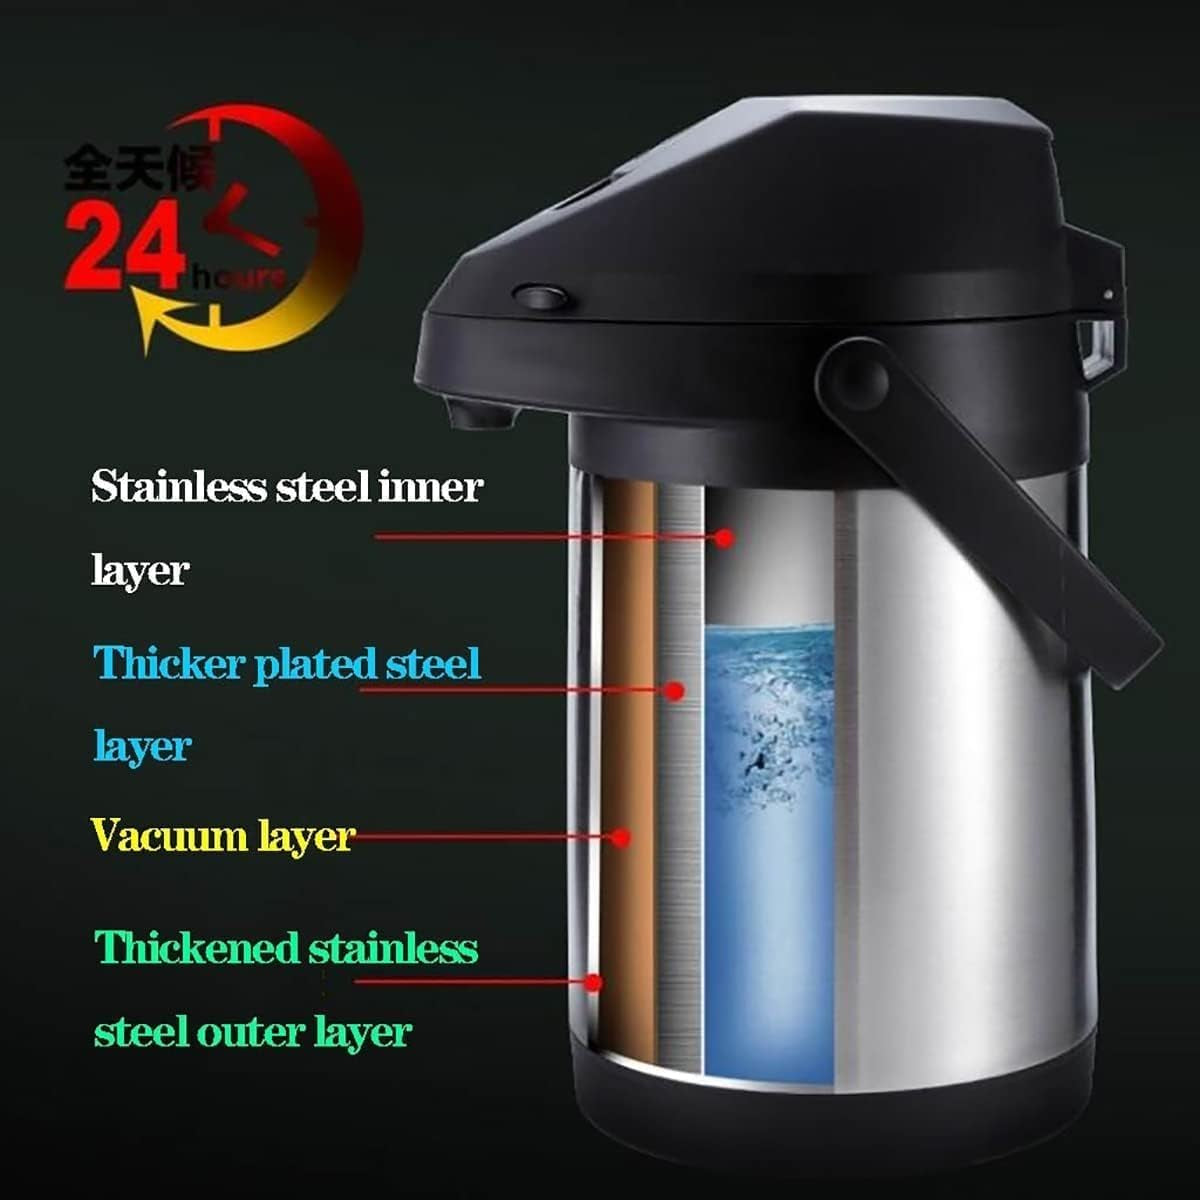 Large Capacity 101 Oz & 3L Airpot Thermal Coffee Dispenser with Pump, Double Walled Insulated Stainless Steel Beverage Dispenser for Hot & Cold Water 